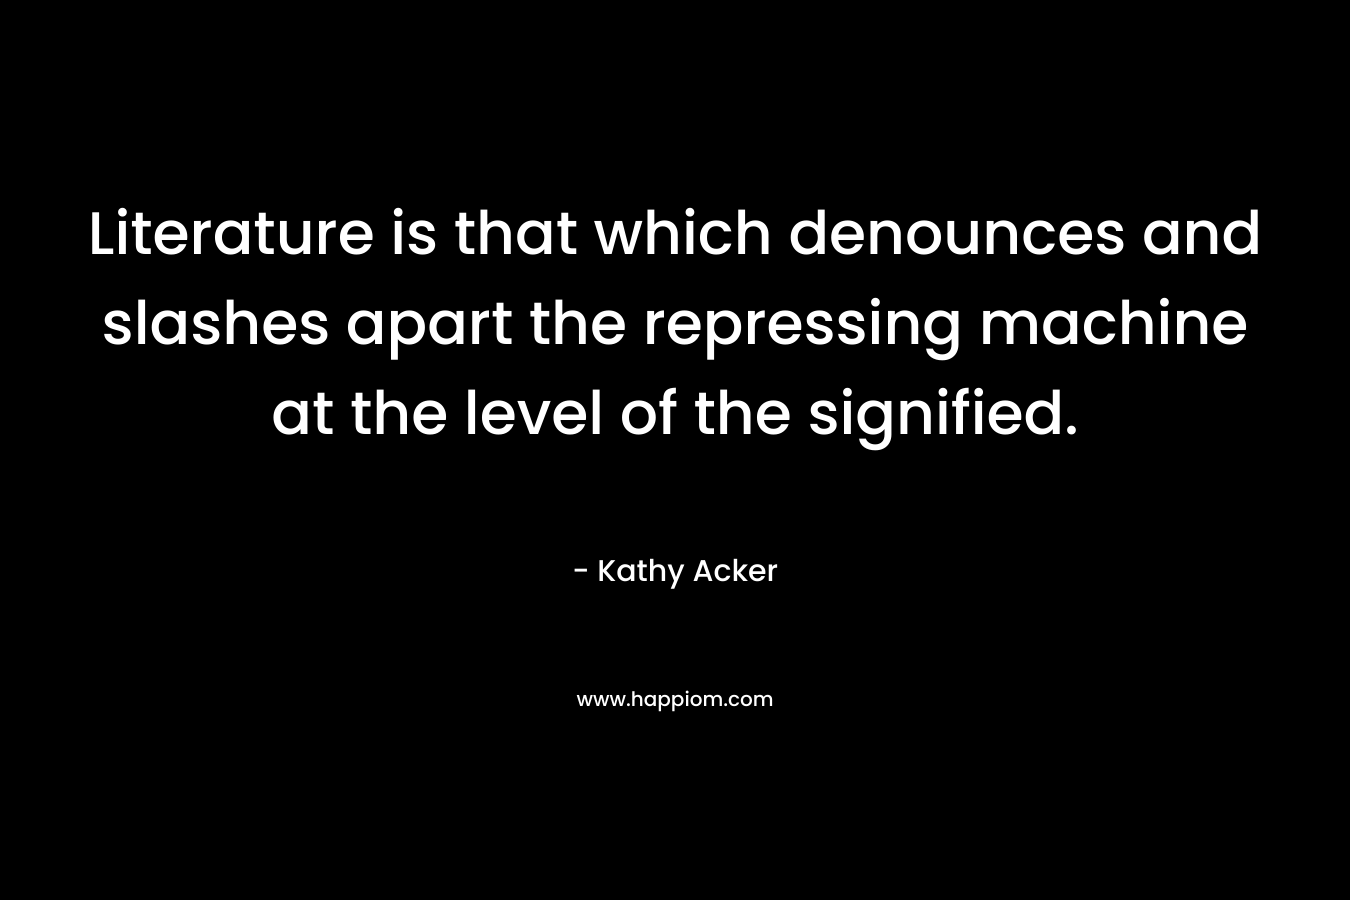 Literature is that which denounces and slashes apart the repressing machine at the level of the signified. – Kathy Acker